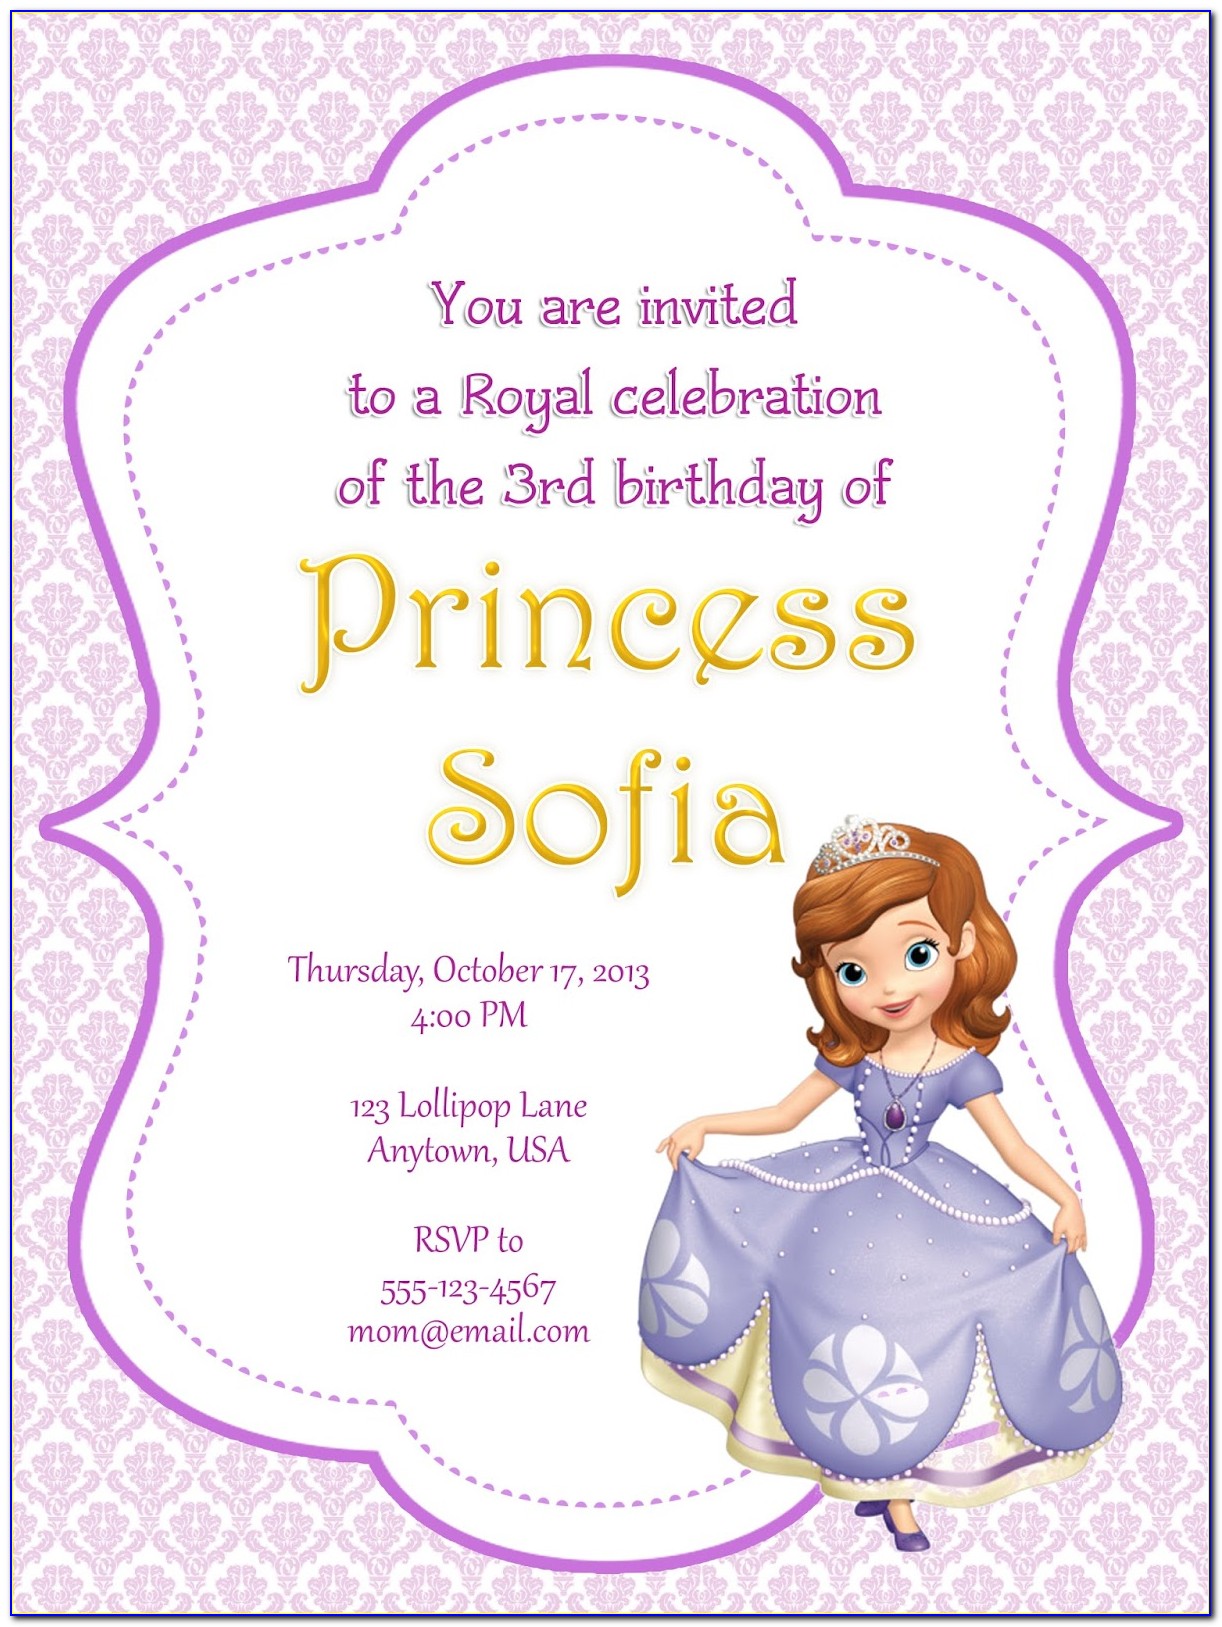 Sofia The First Party Invitation Free Template